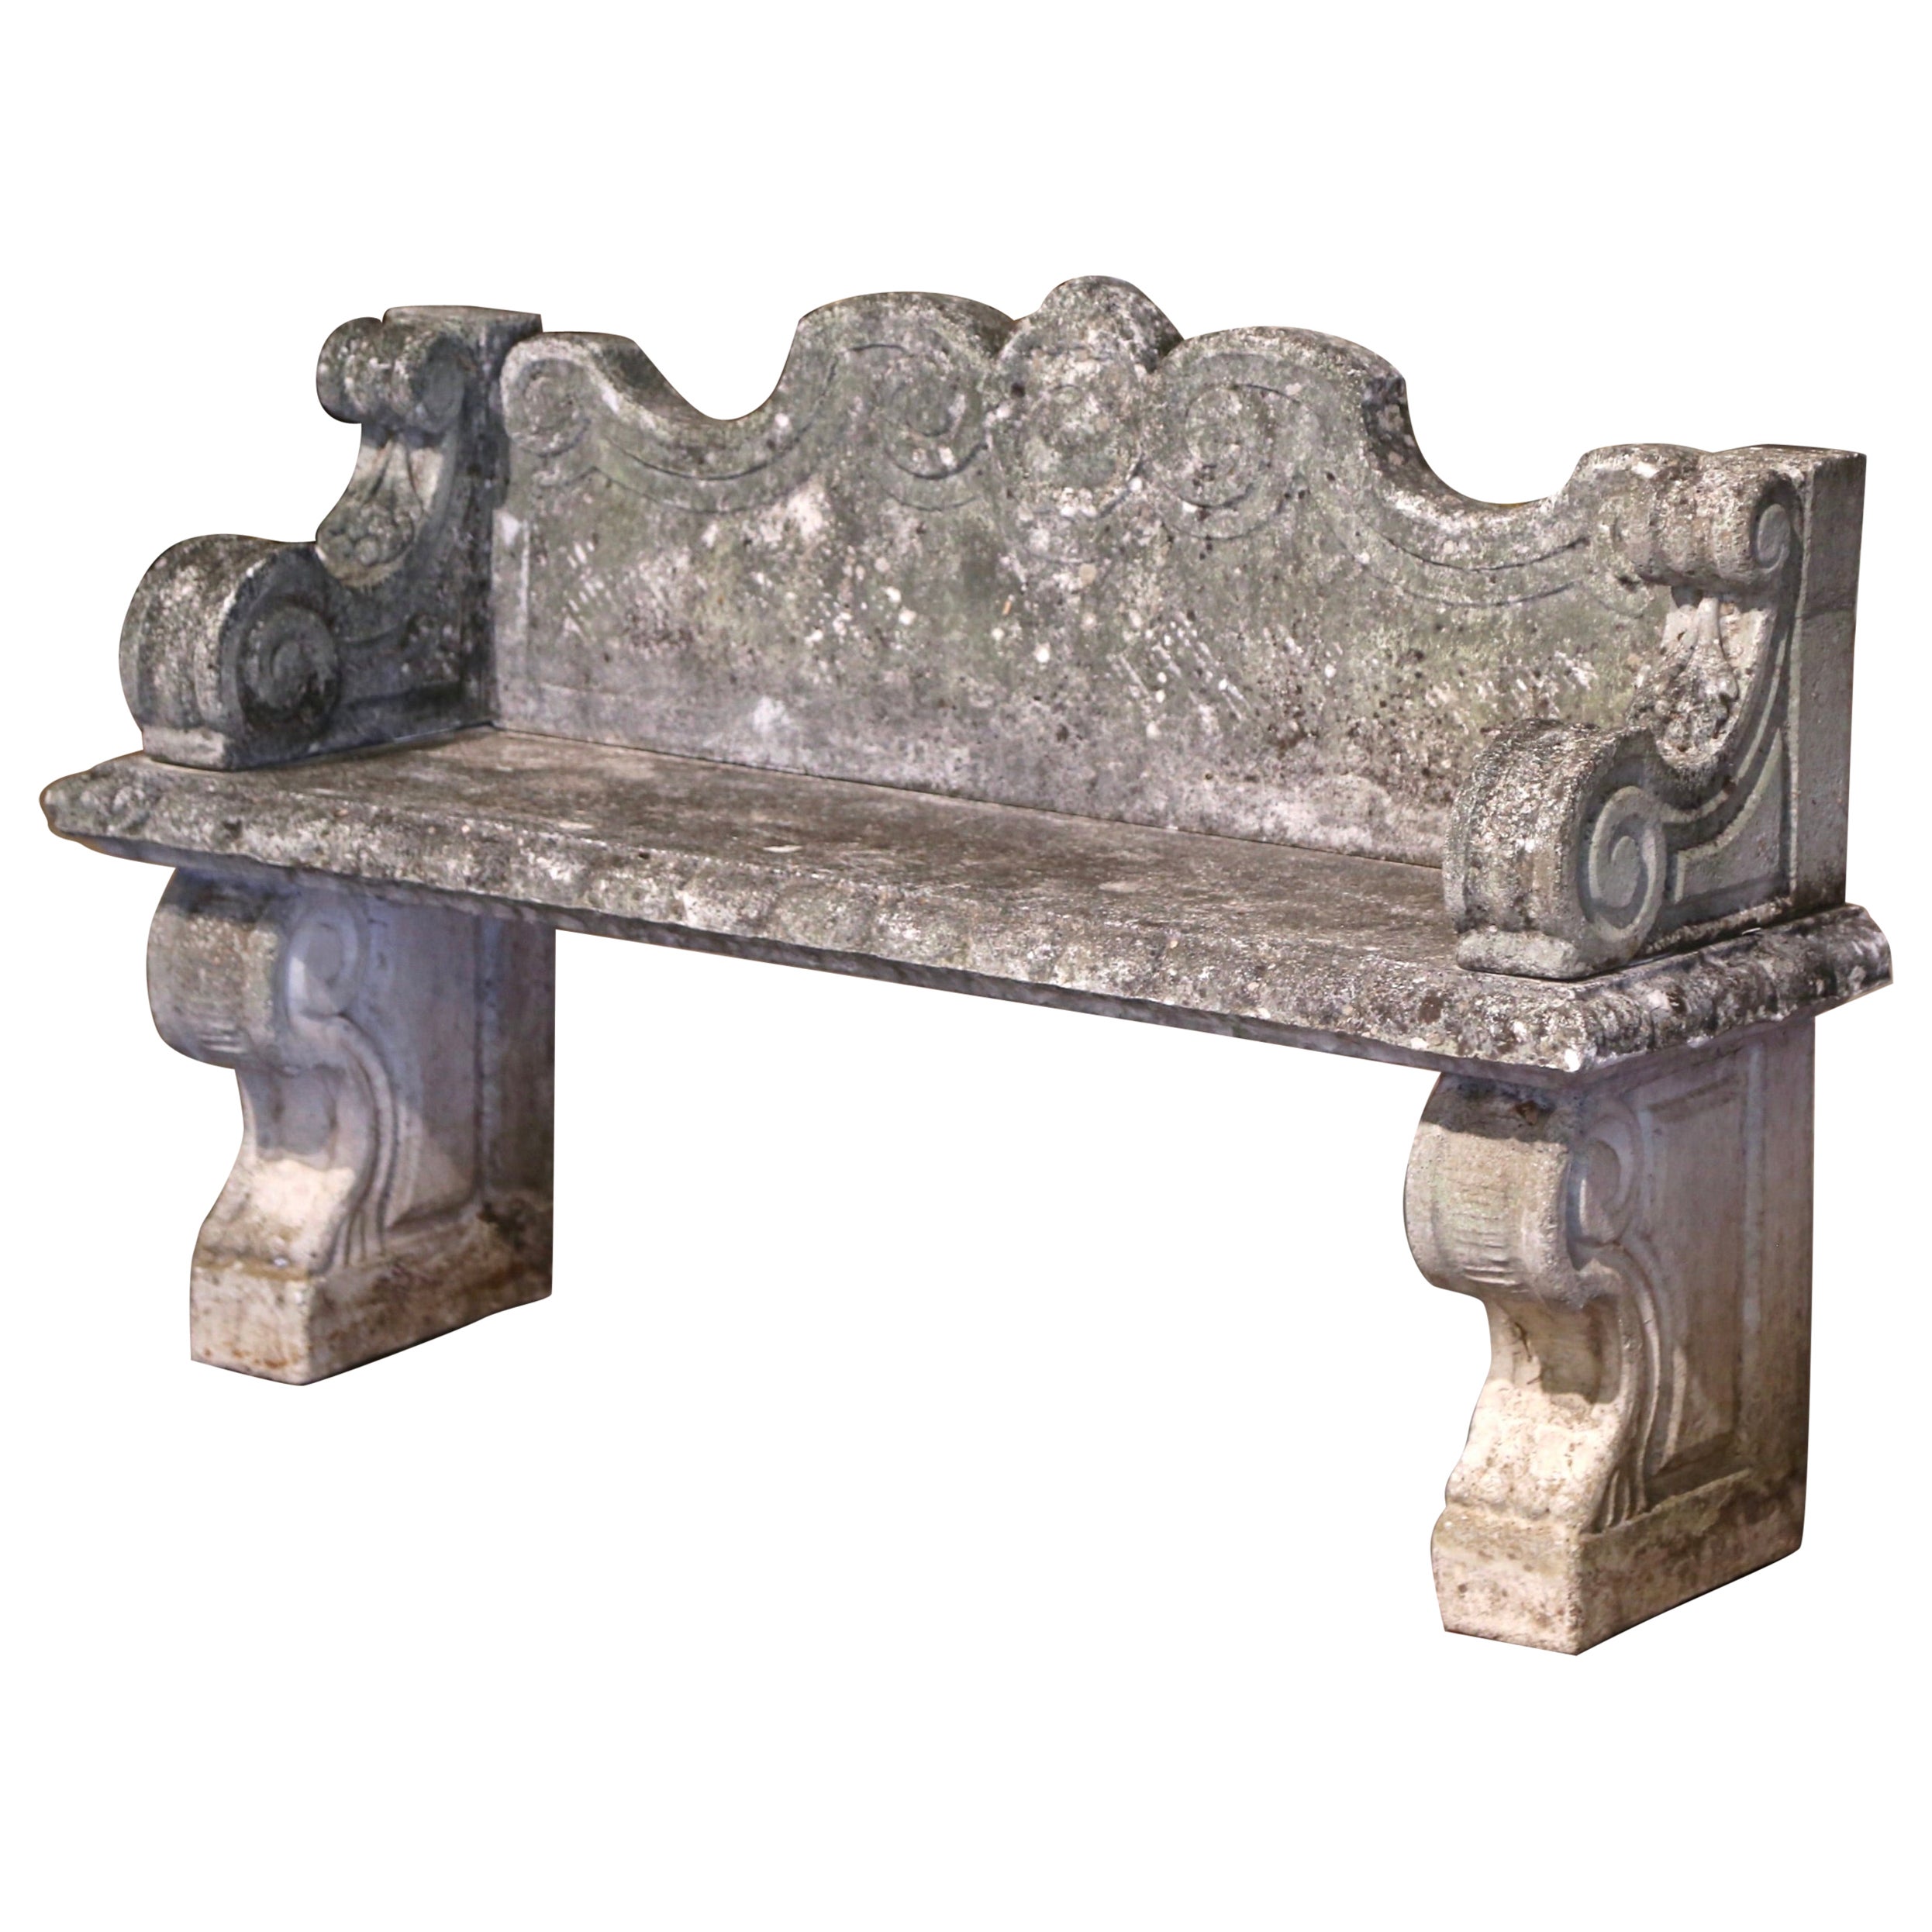 Mid-19th Century French Carved Weathered Stone Garden Bench from Normandy